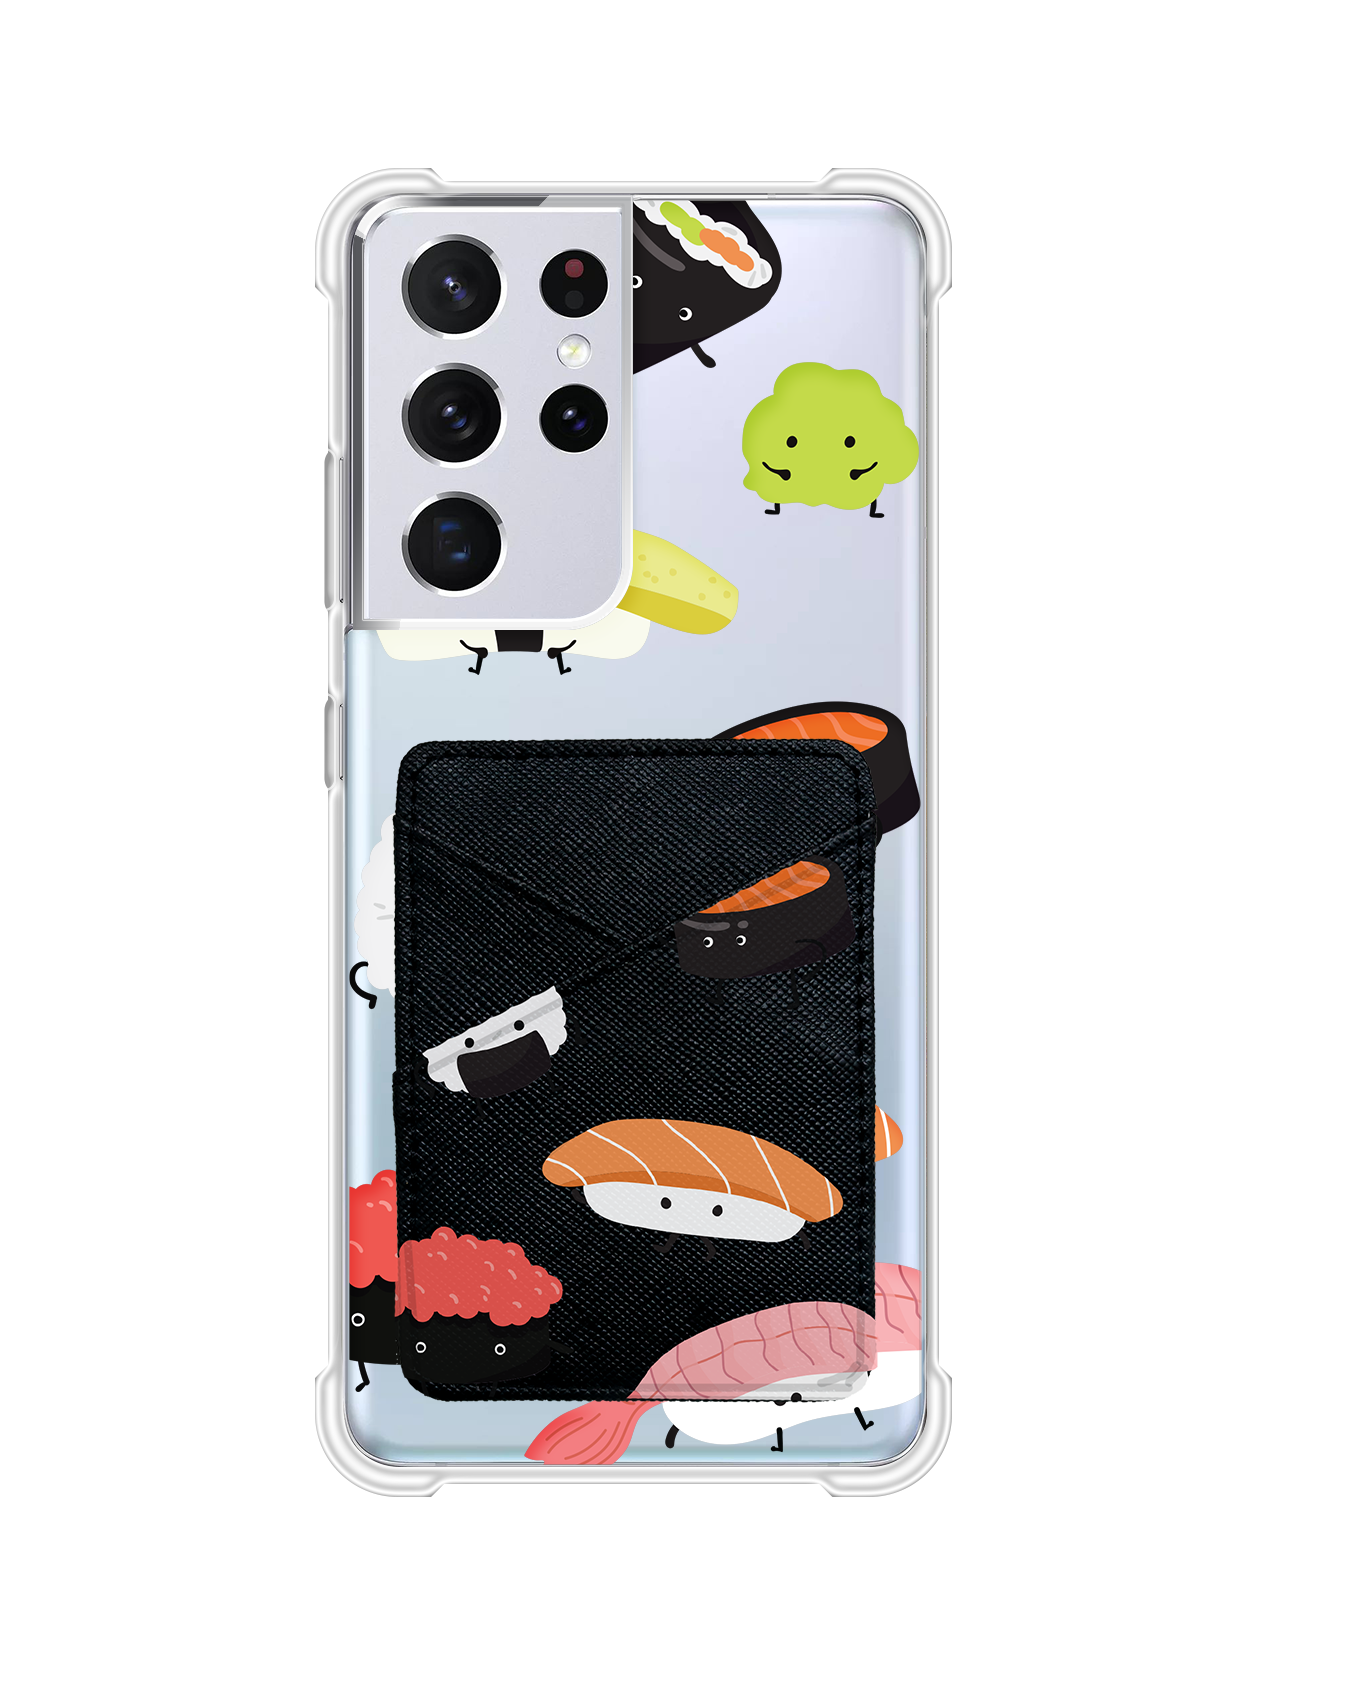 Android Phone Wallet Case - Omakase